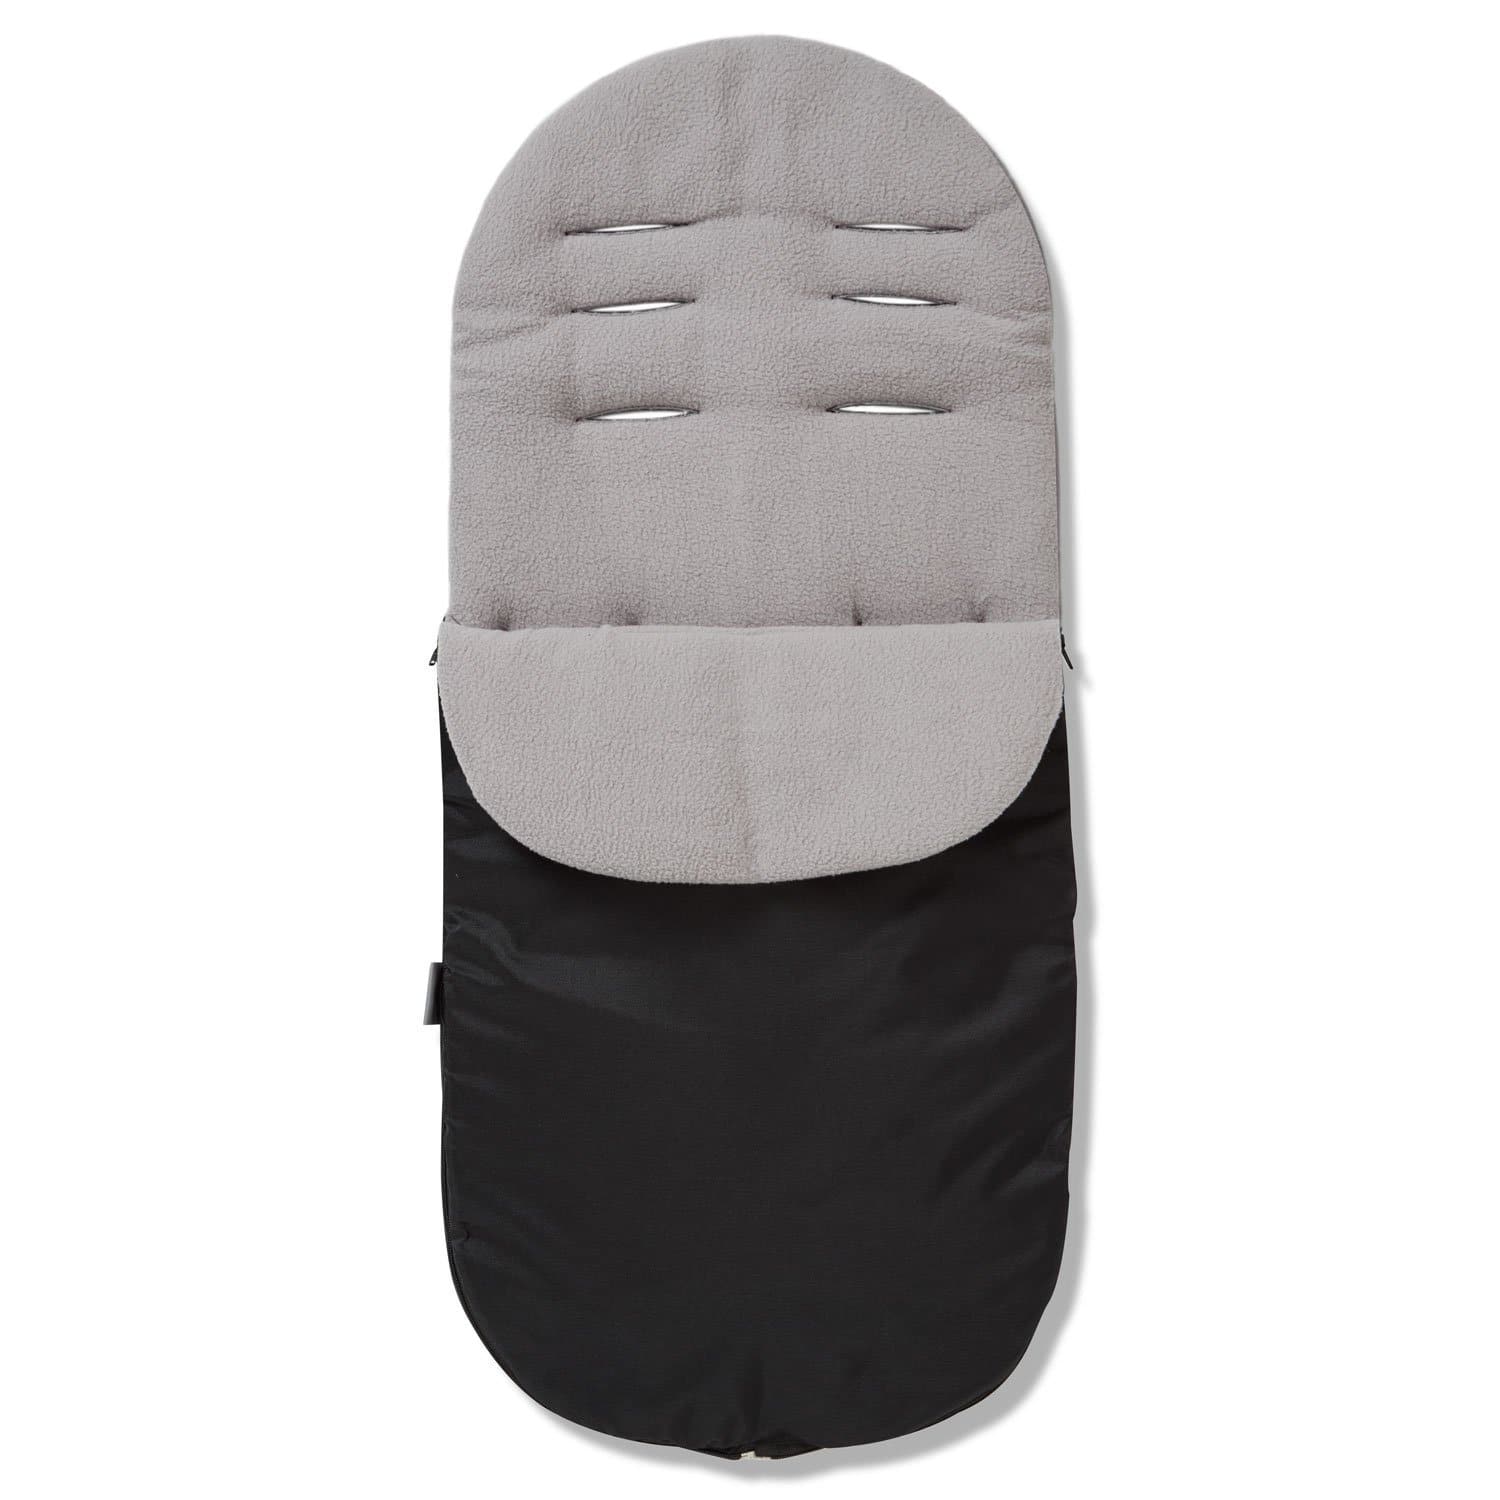 Footmuff / Cosy Toes Compatible with Unilove - Grey / Fits All Models | For Your Little One